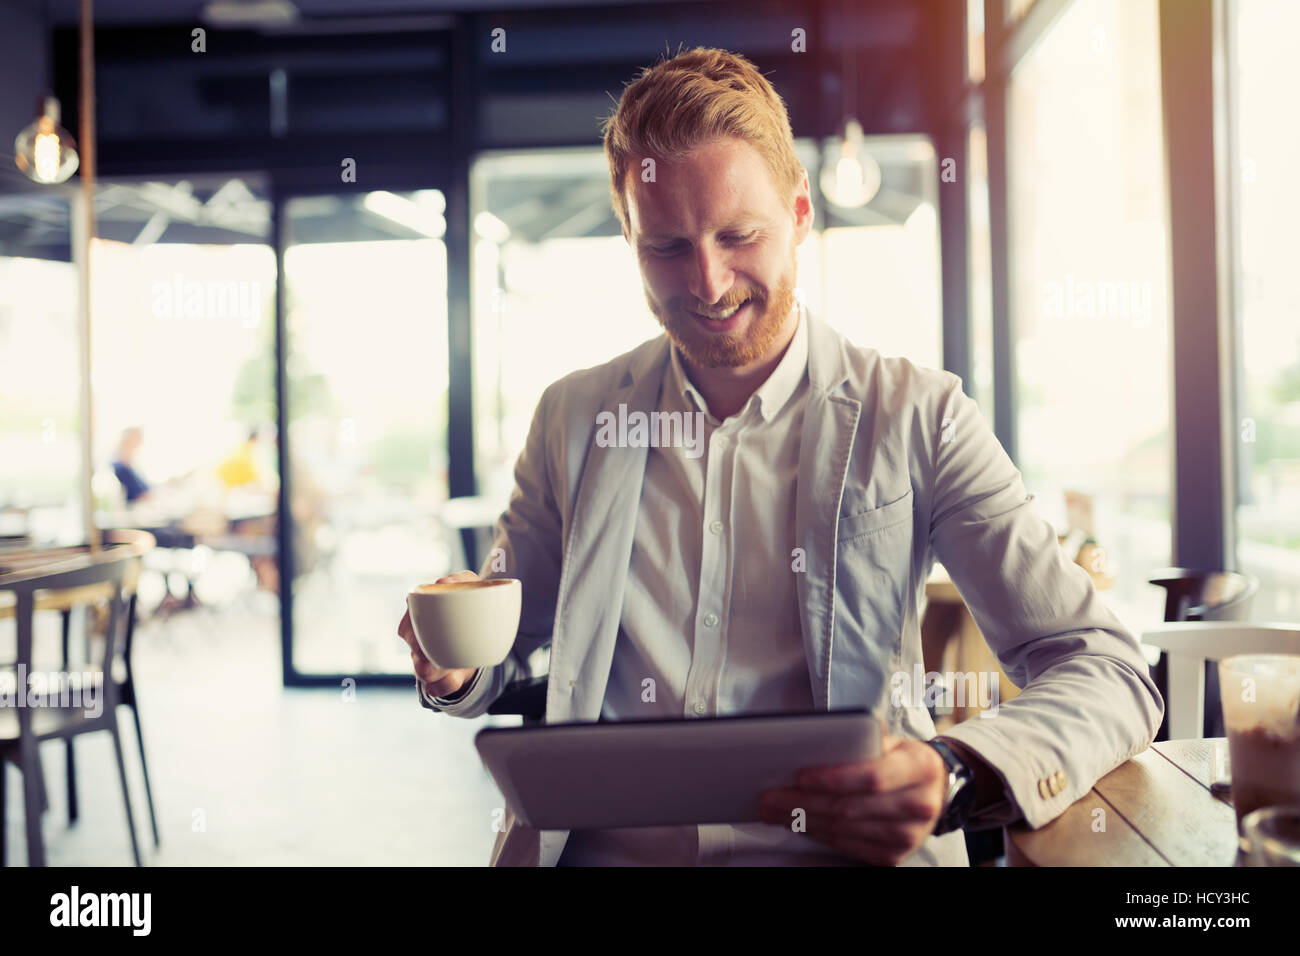 Busy businessman on coffee break using tablet Stock Photo